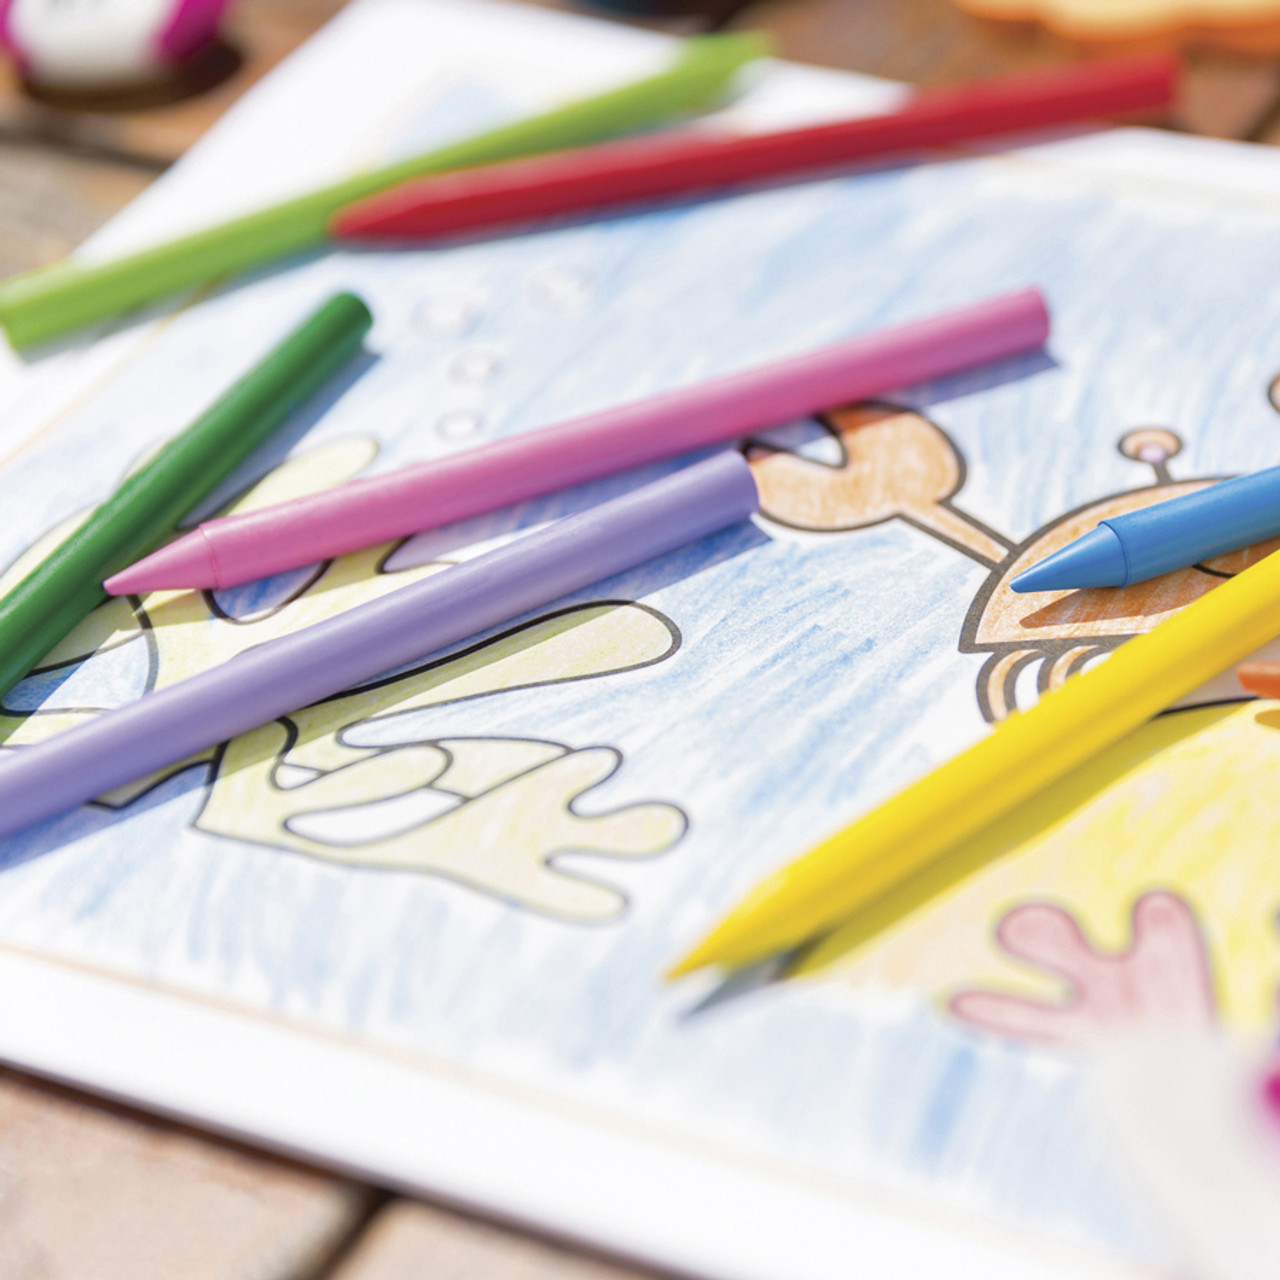 BIC Break-Resistant Crayons and Colored Pencils for Kids